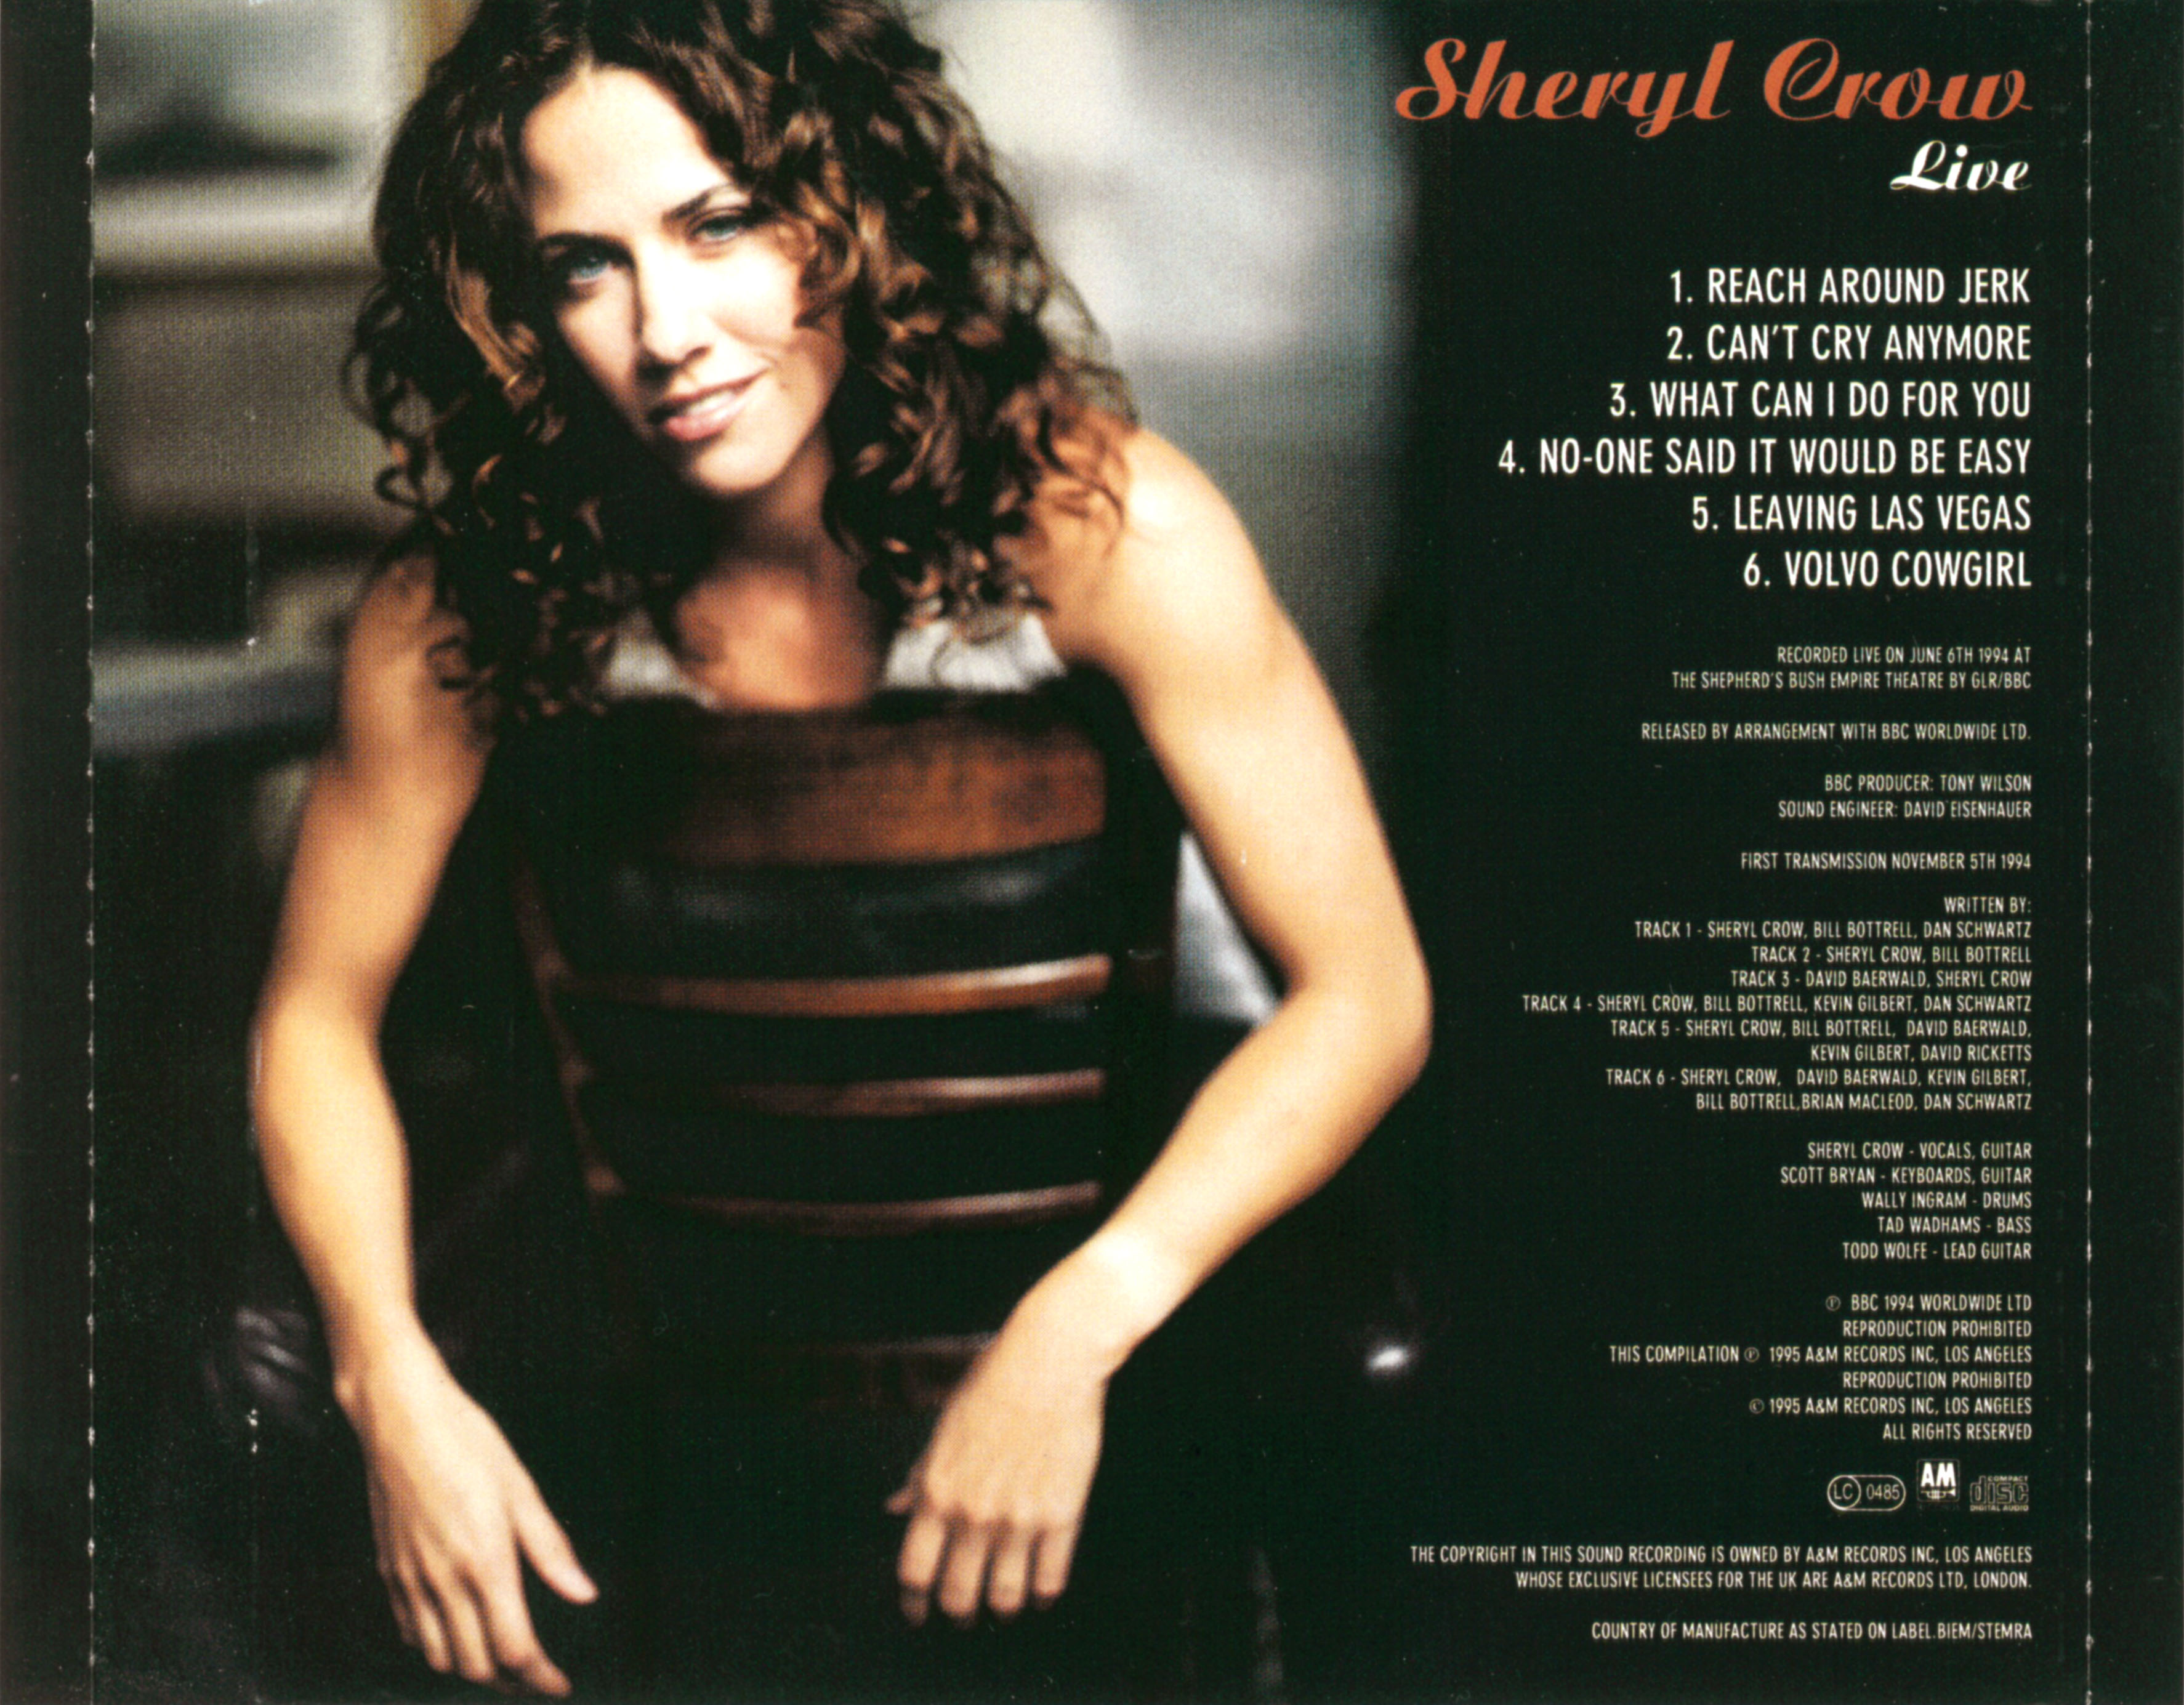 Release “Tuesday Night Music Club” by Sheryl Crow - Cover Art